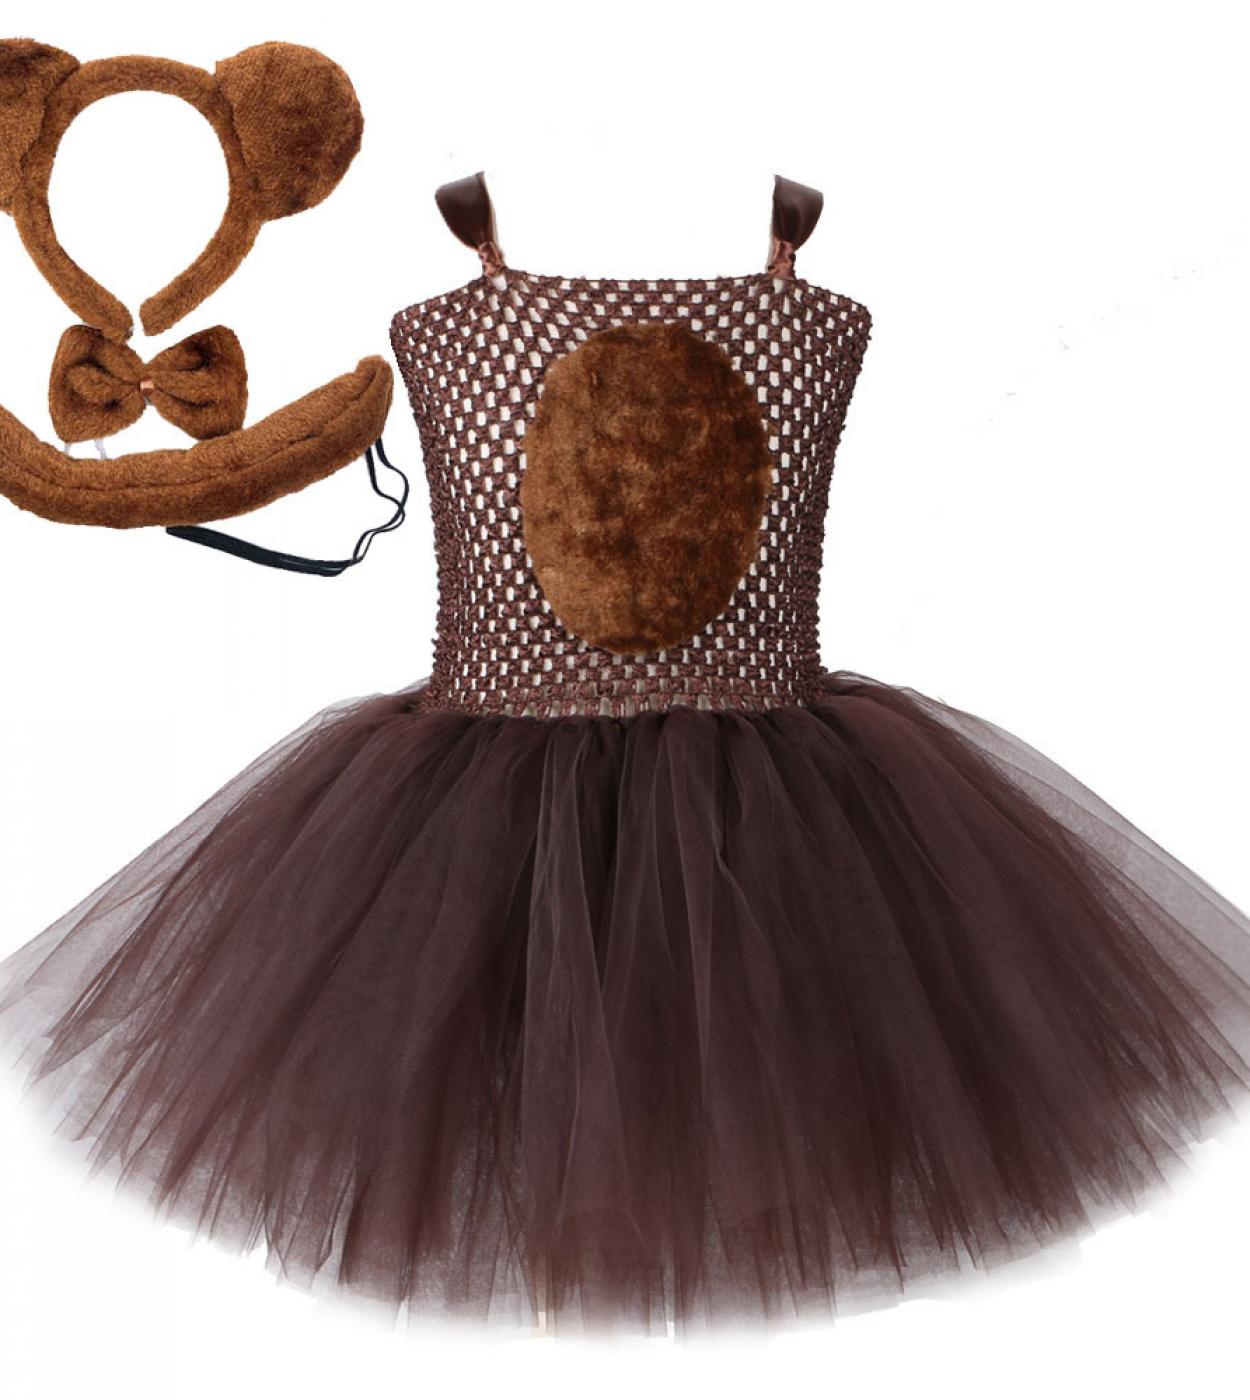 Brown Bear Tutu Dress Outfit For Girls Kids Animal Halloween Cosplay Costumes Children Christmas Birthday Dresses With H